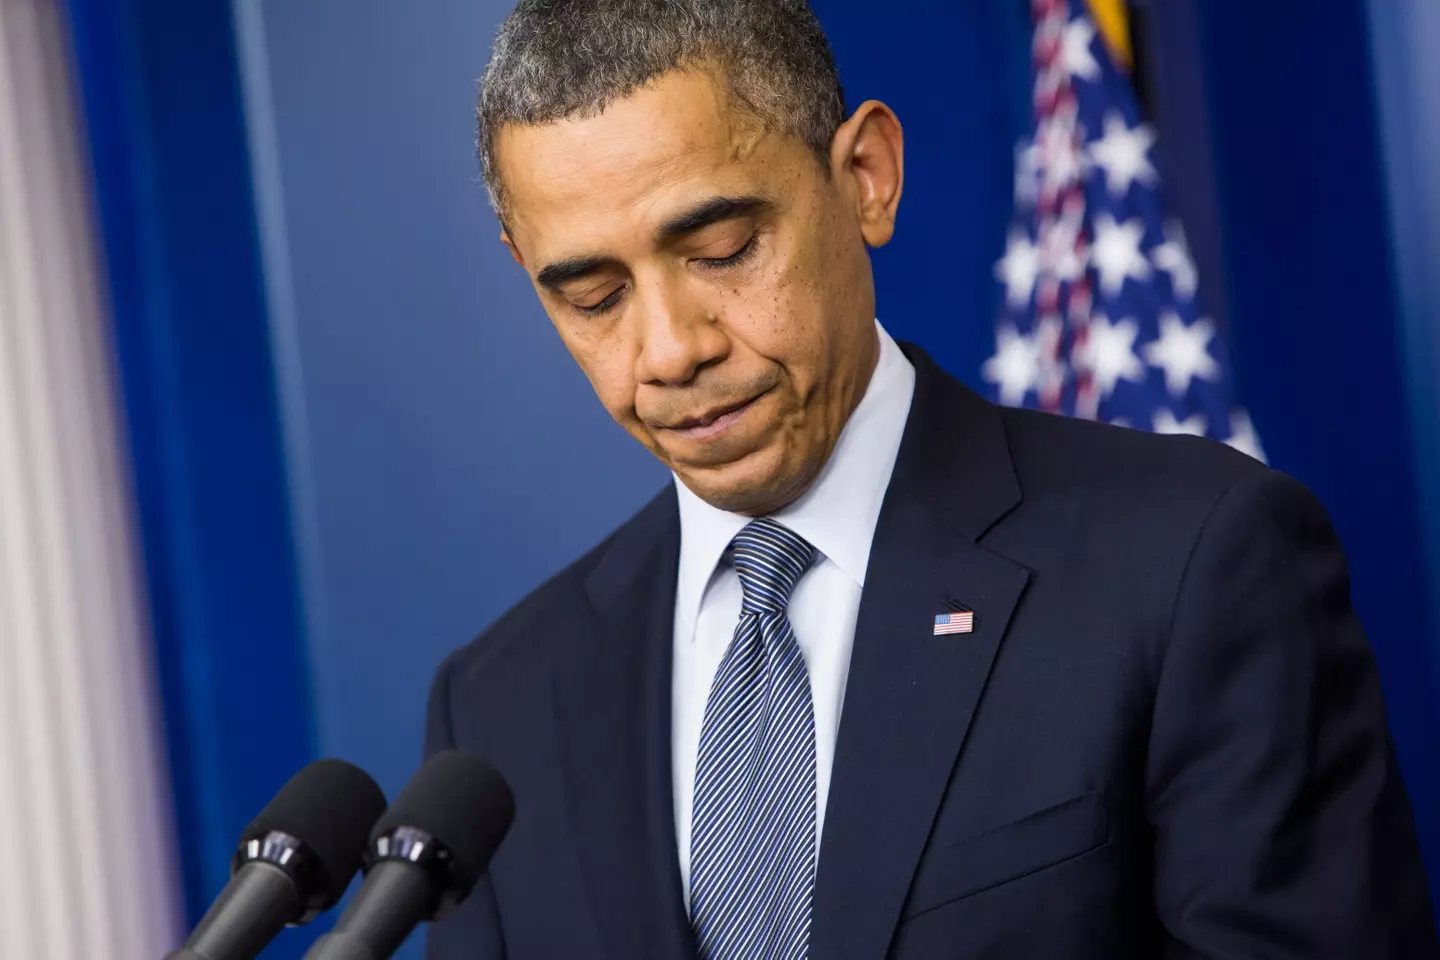 Former President Obama spoke of his hopelessness after the 2021 Sandy Hook shooting.